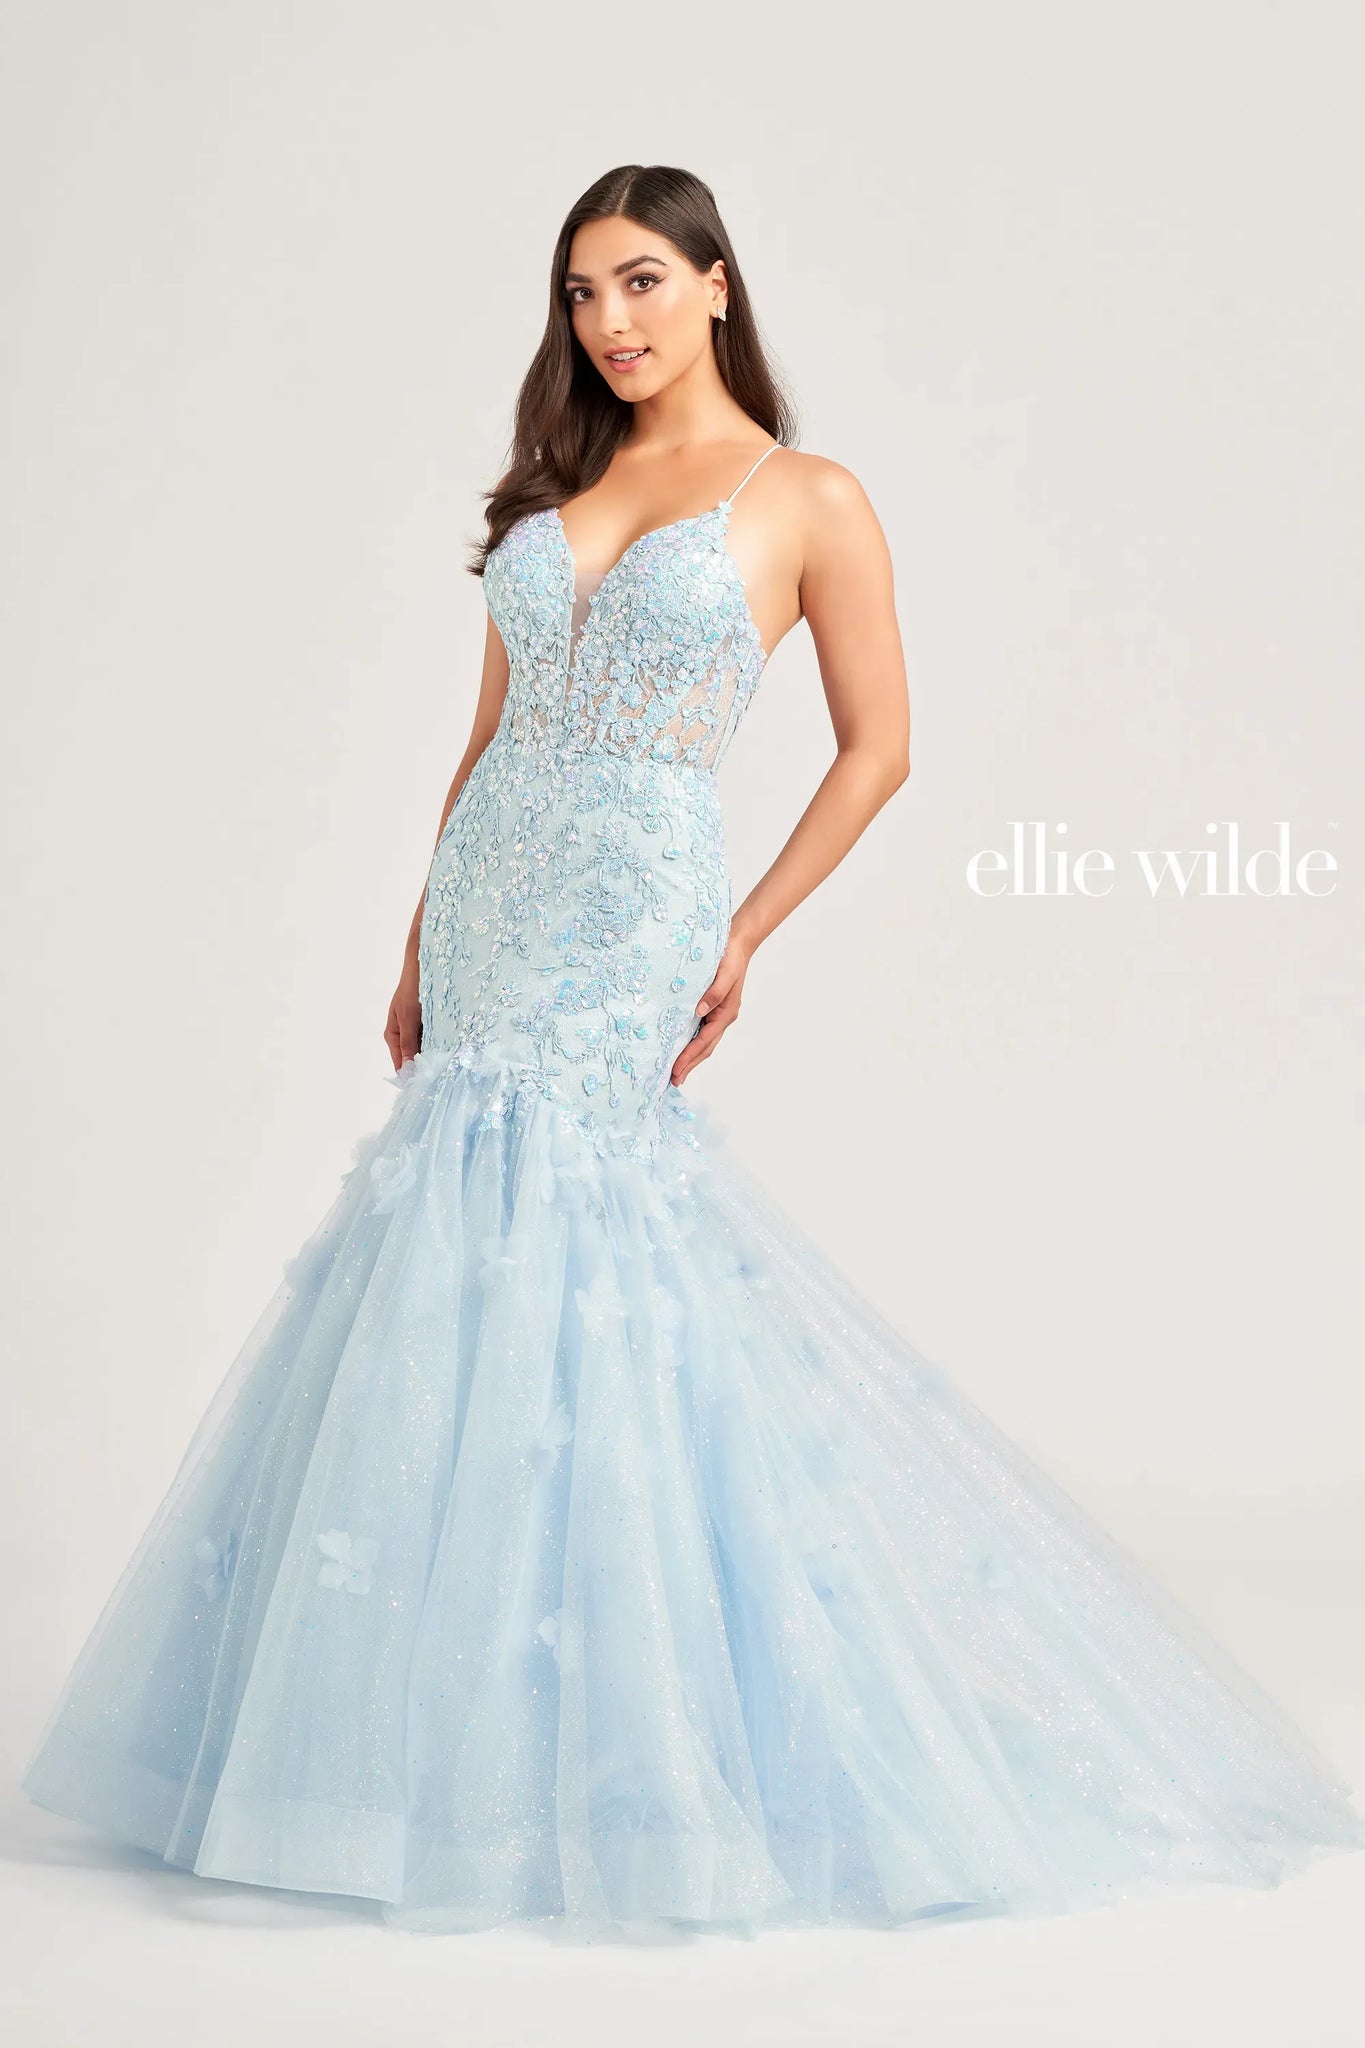 Have all eyes on you when you walk into your senior prom rocking this glamorous Ellie Wilde gown style EW35080. Featuring a plunging v cut neckline with two spaghetti straps that create an adjustable lace up corset back, perfect to cinch your waist and show off your curves. Mermaid silhouette is adorned in a beautiful floral appliques.